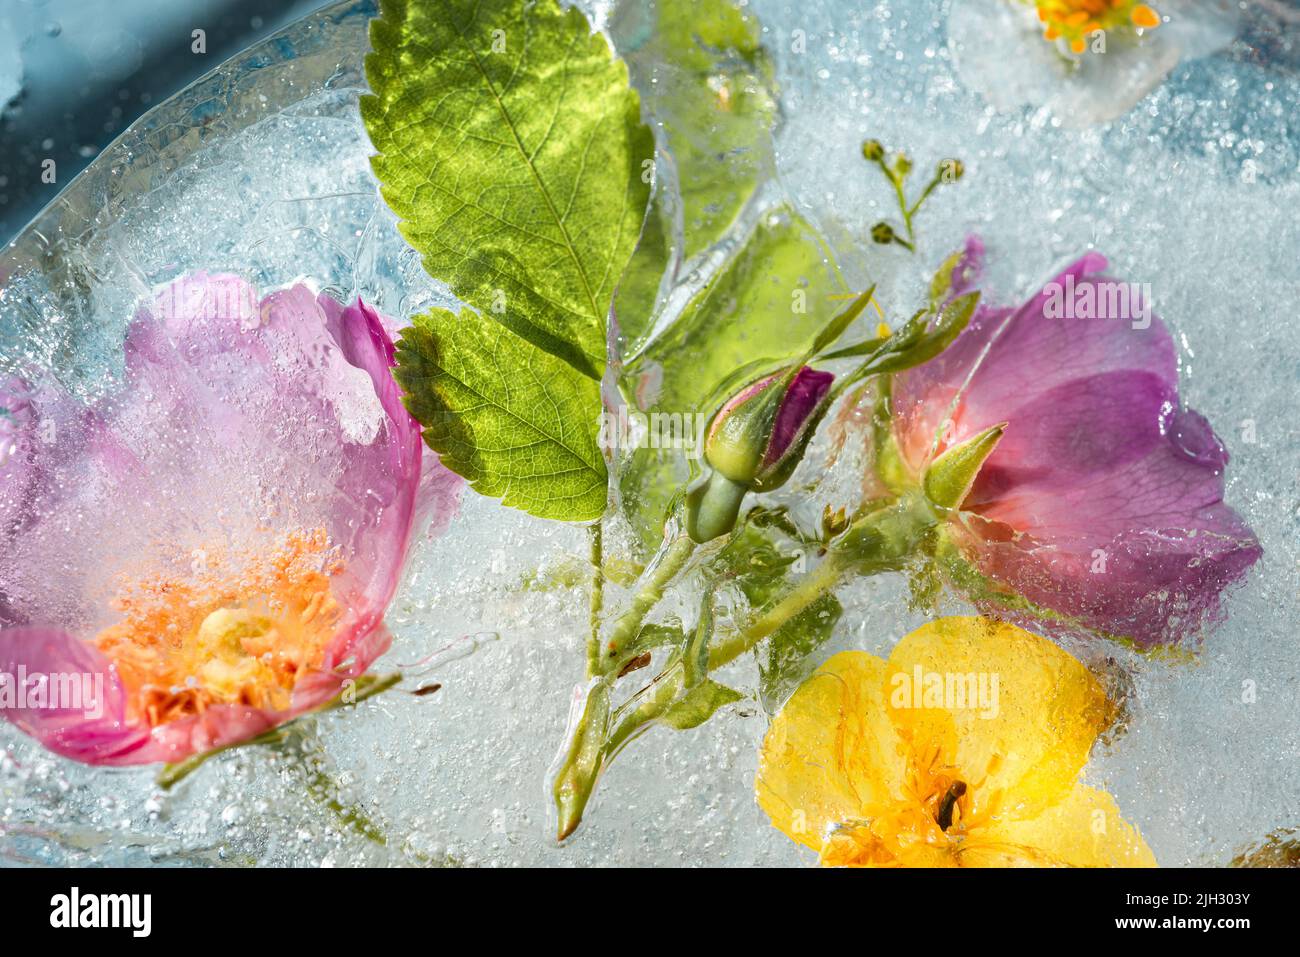 Abstract background of frozen multicolored flowers. Flowers in ice in the sunlight Flat lay Creative beauty backdrop Concept cryo freezing Stock Photo